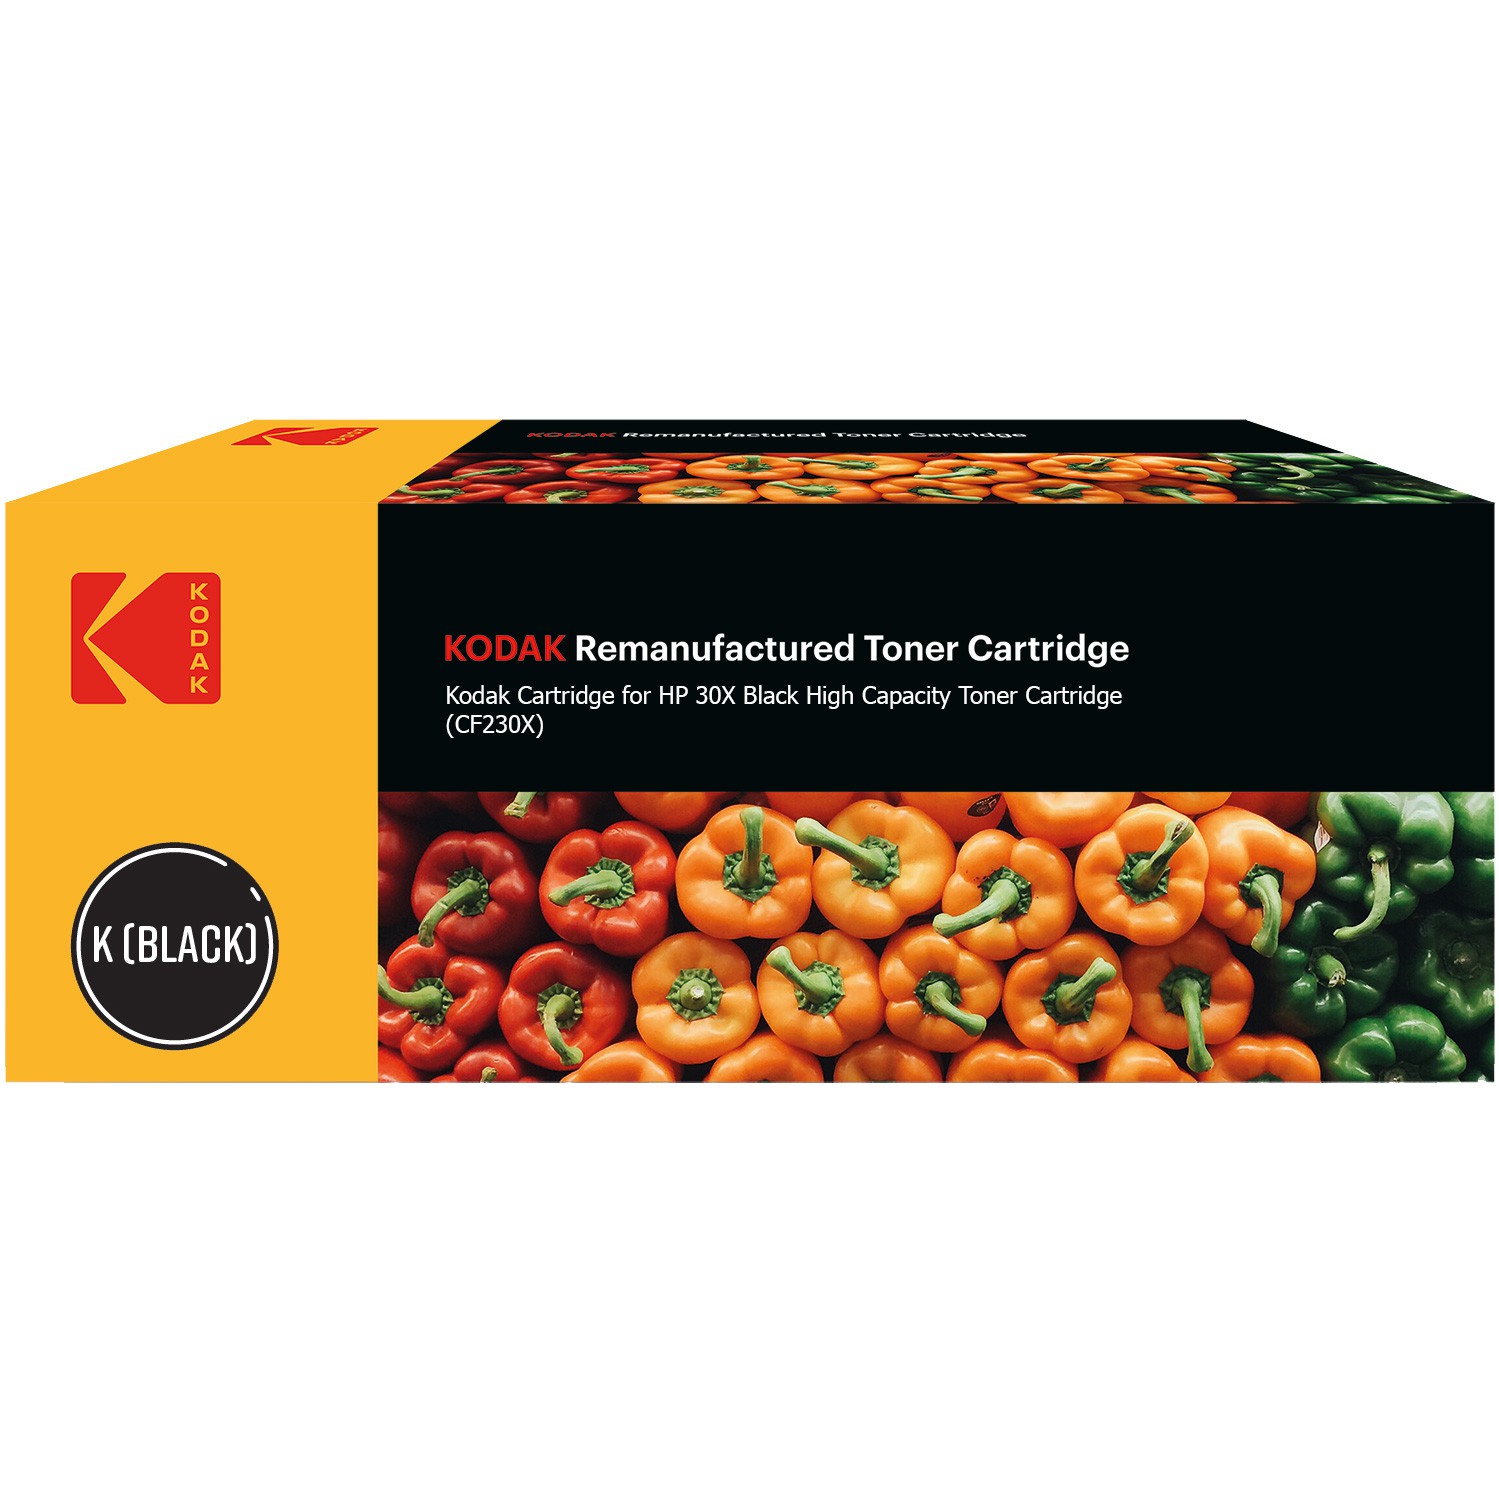 KODAK+Replacement+Toner+Cartridge+for+use+in+HP+LJ+M203+30X+%2F+CF230X+%2F+Mono+3500+pages